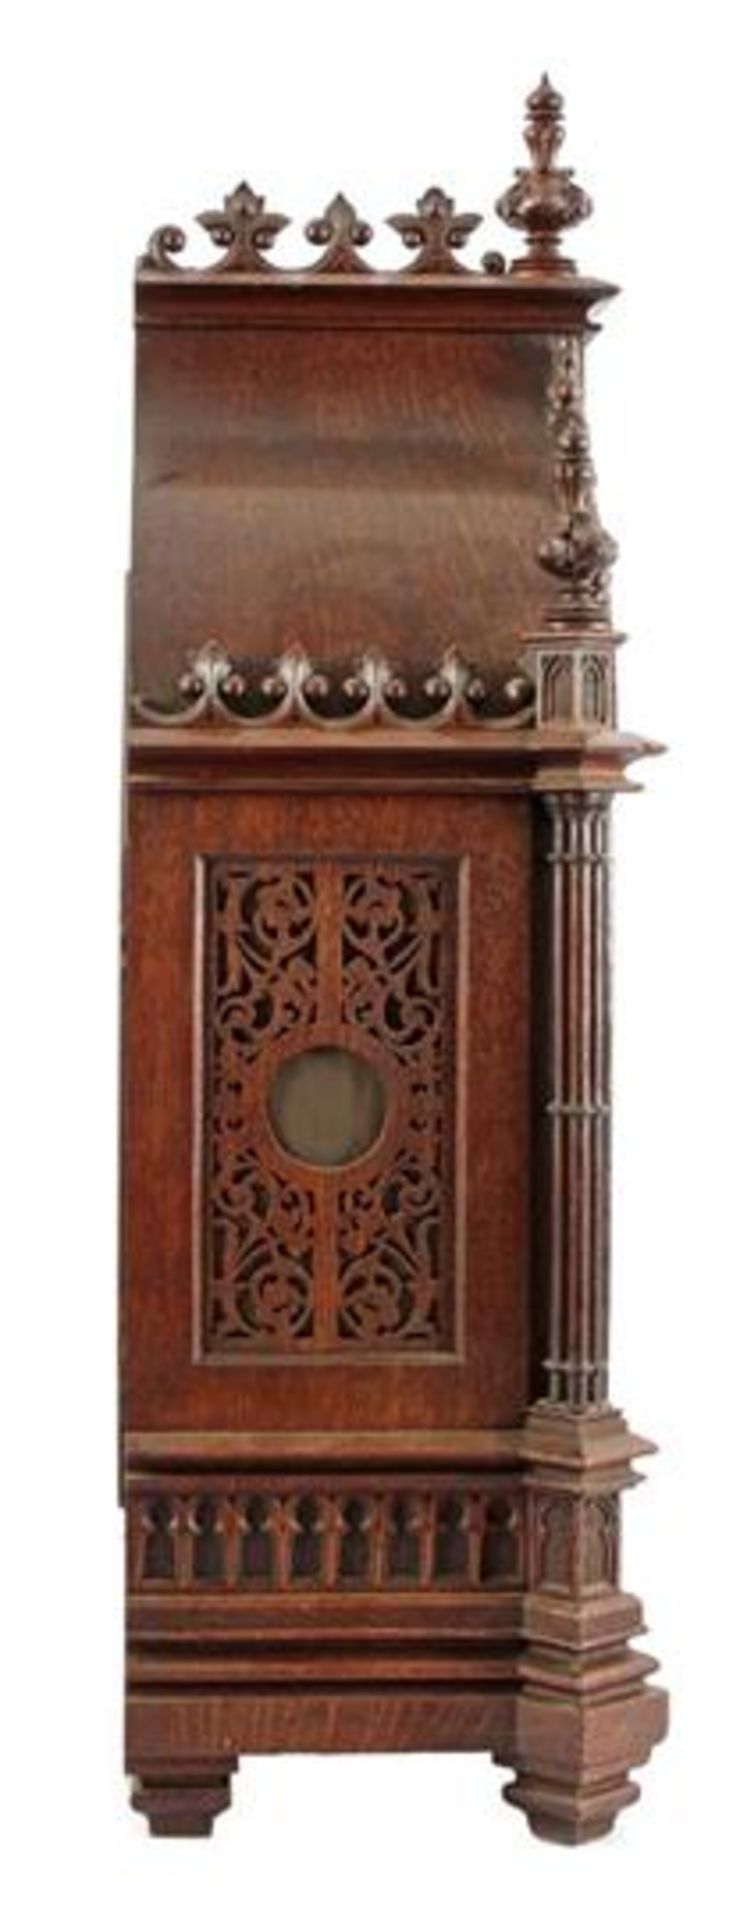 Lenzkirch table clock in gothic style with a pierced oak case with openwork & nbsp; parts 80 cm - Image 5 of 5